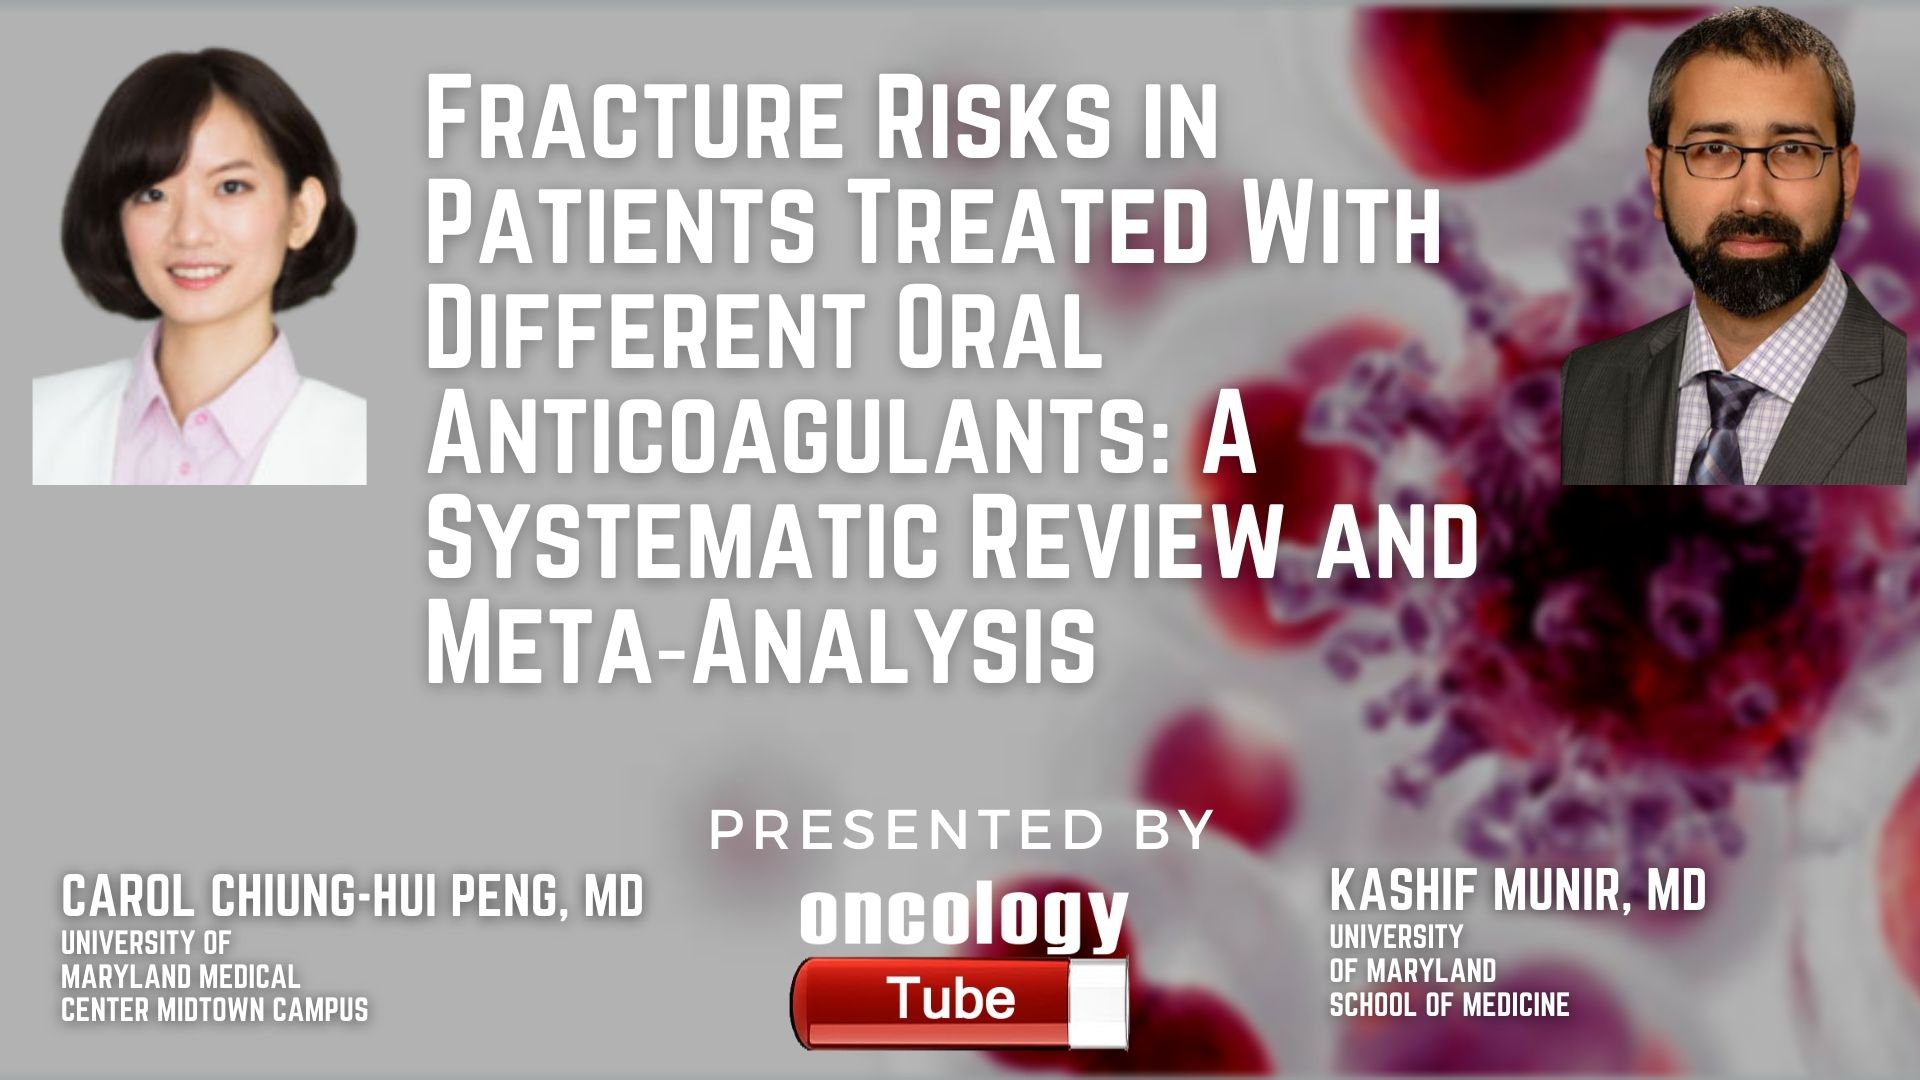 Carol Peng, MD Kashif Munir, MD @CCPeng98 @ummidtownim #HualienTzuChiHospital #Anticoagulants #Cardiology #Research Fracture Risks in Patients Treated With Different Oral Anticoagulants